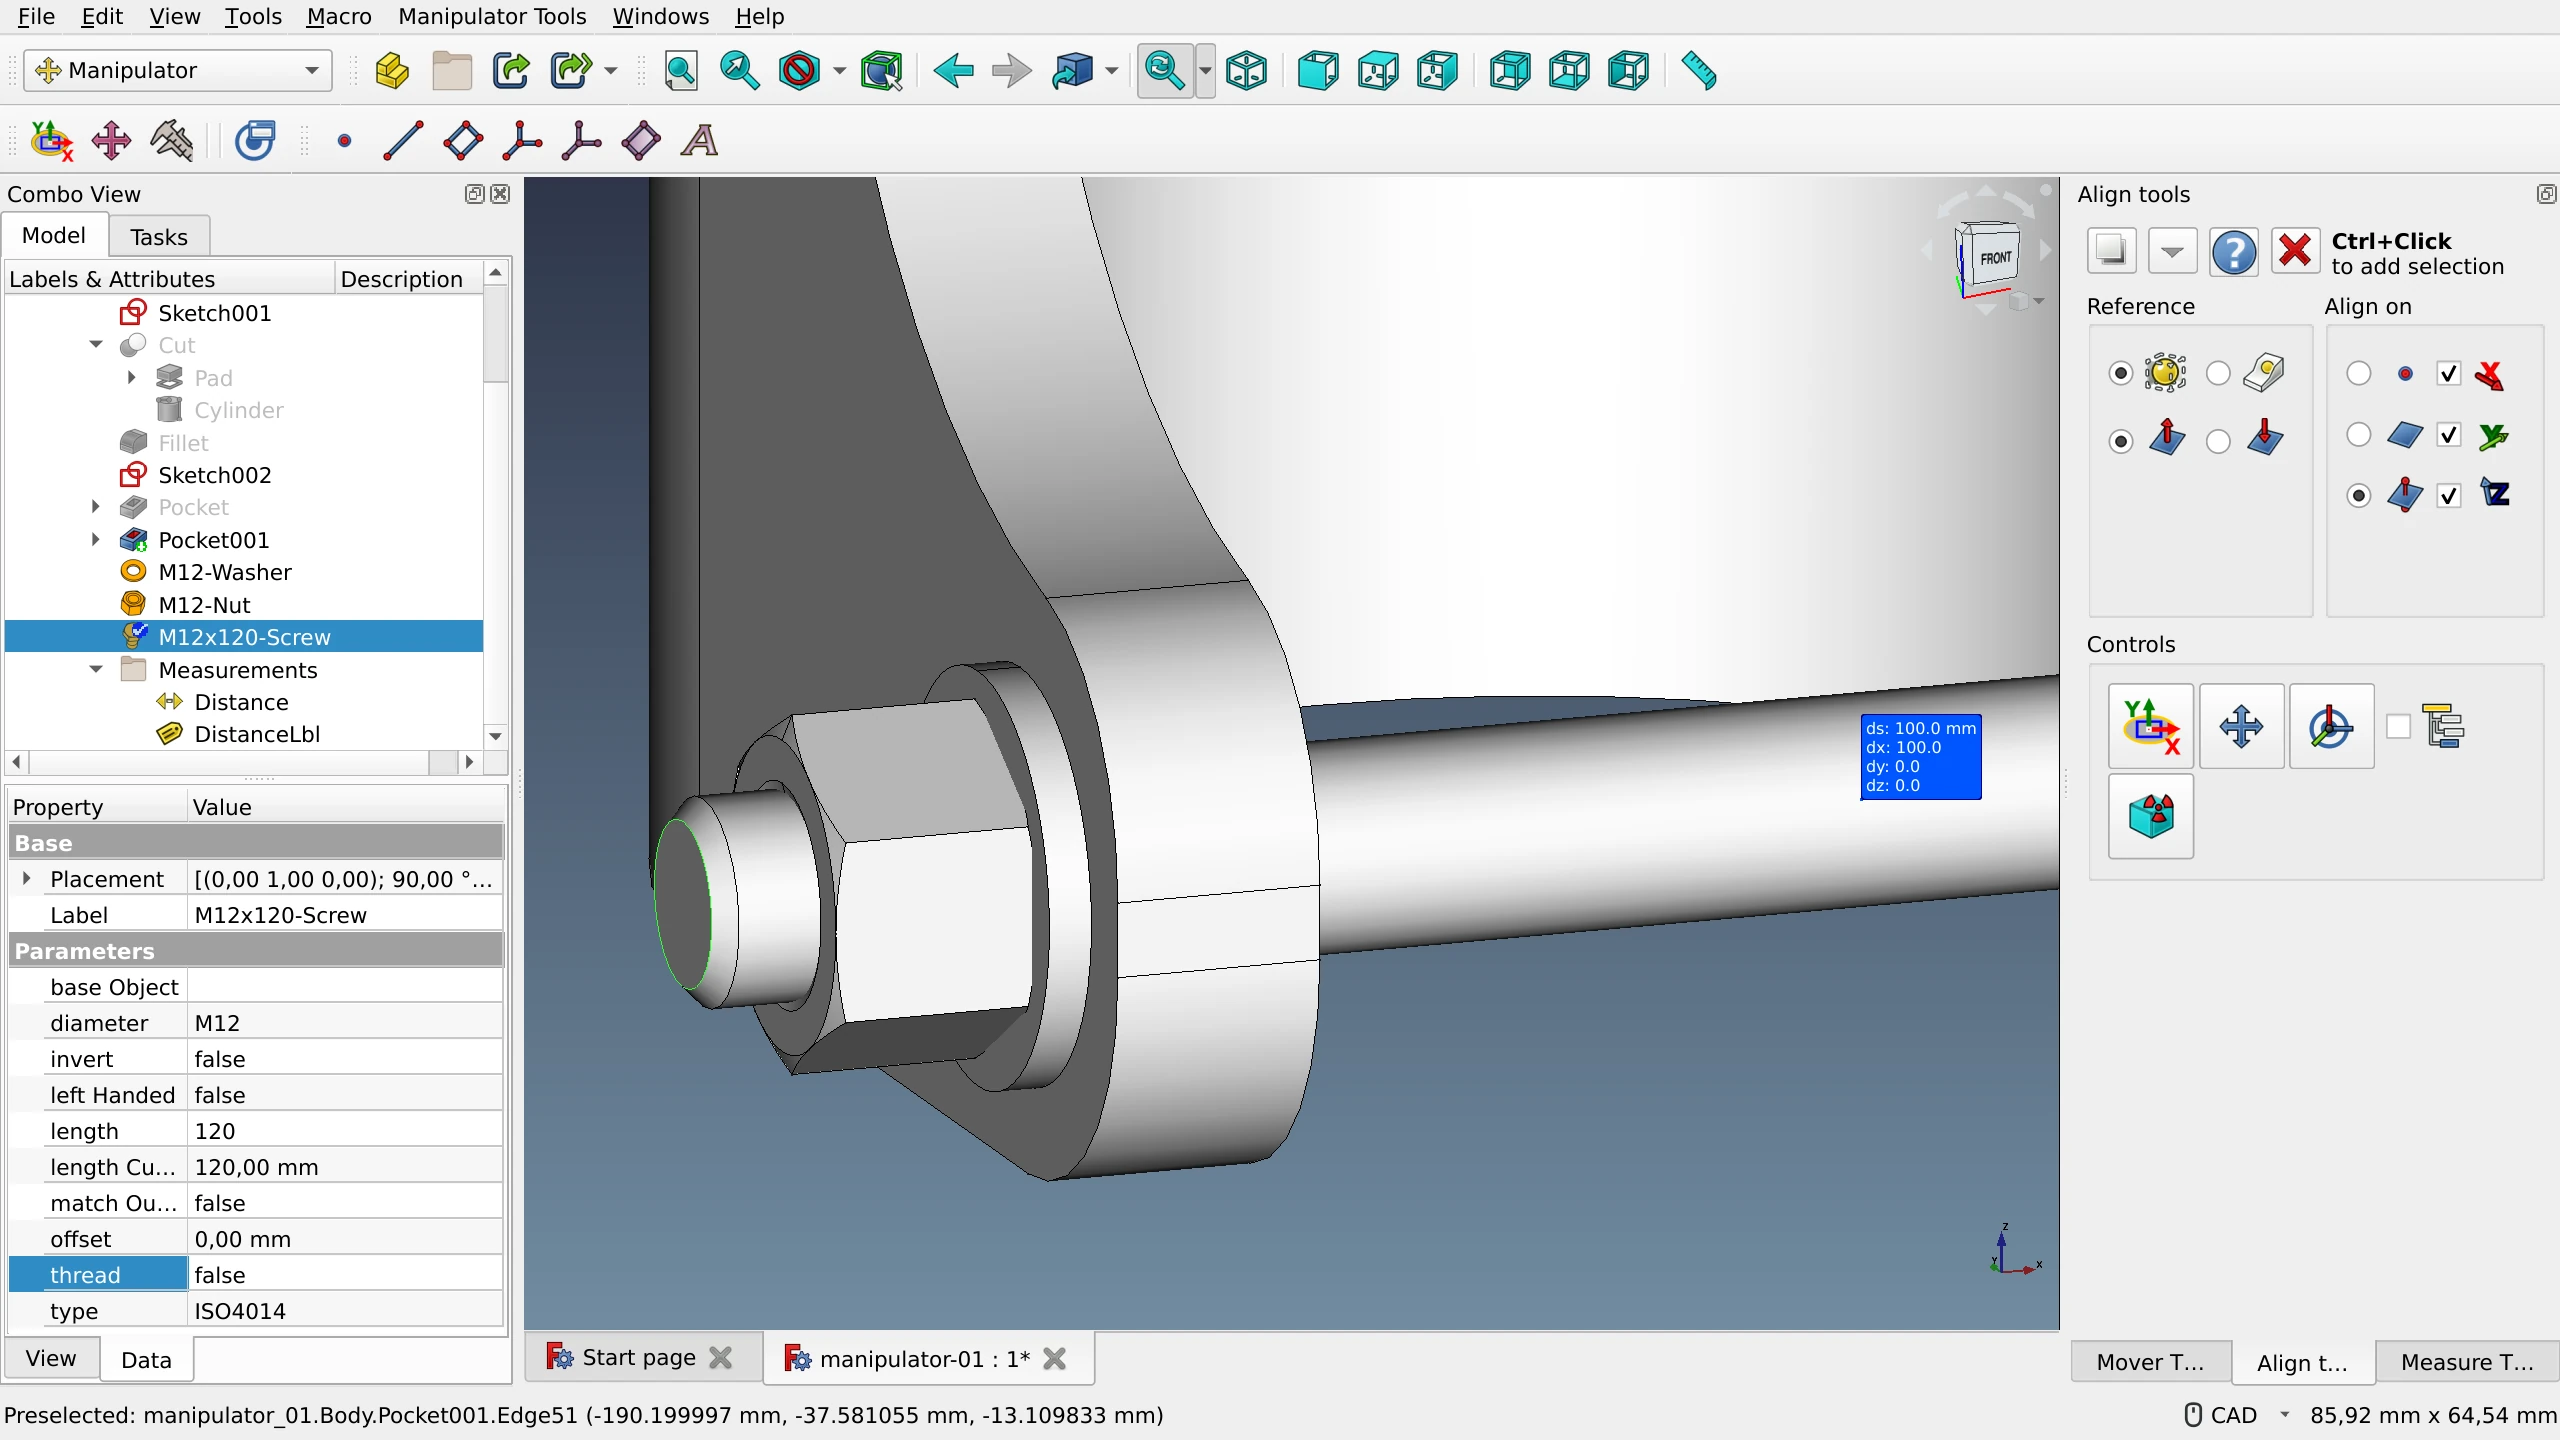 Align tools in the Manipulator workbench